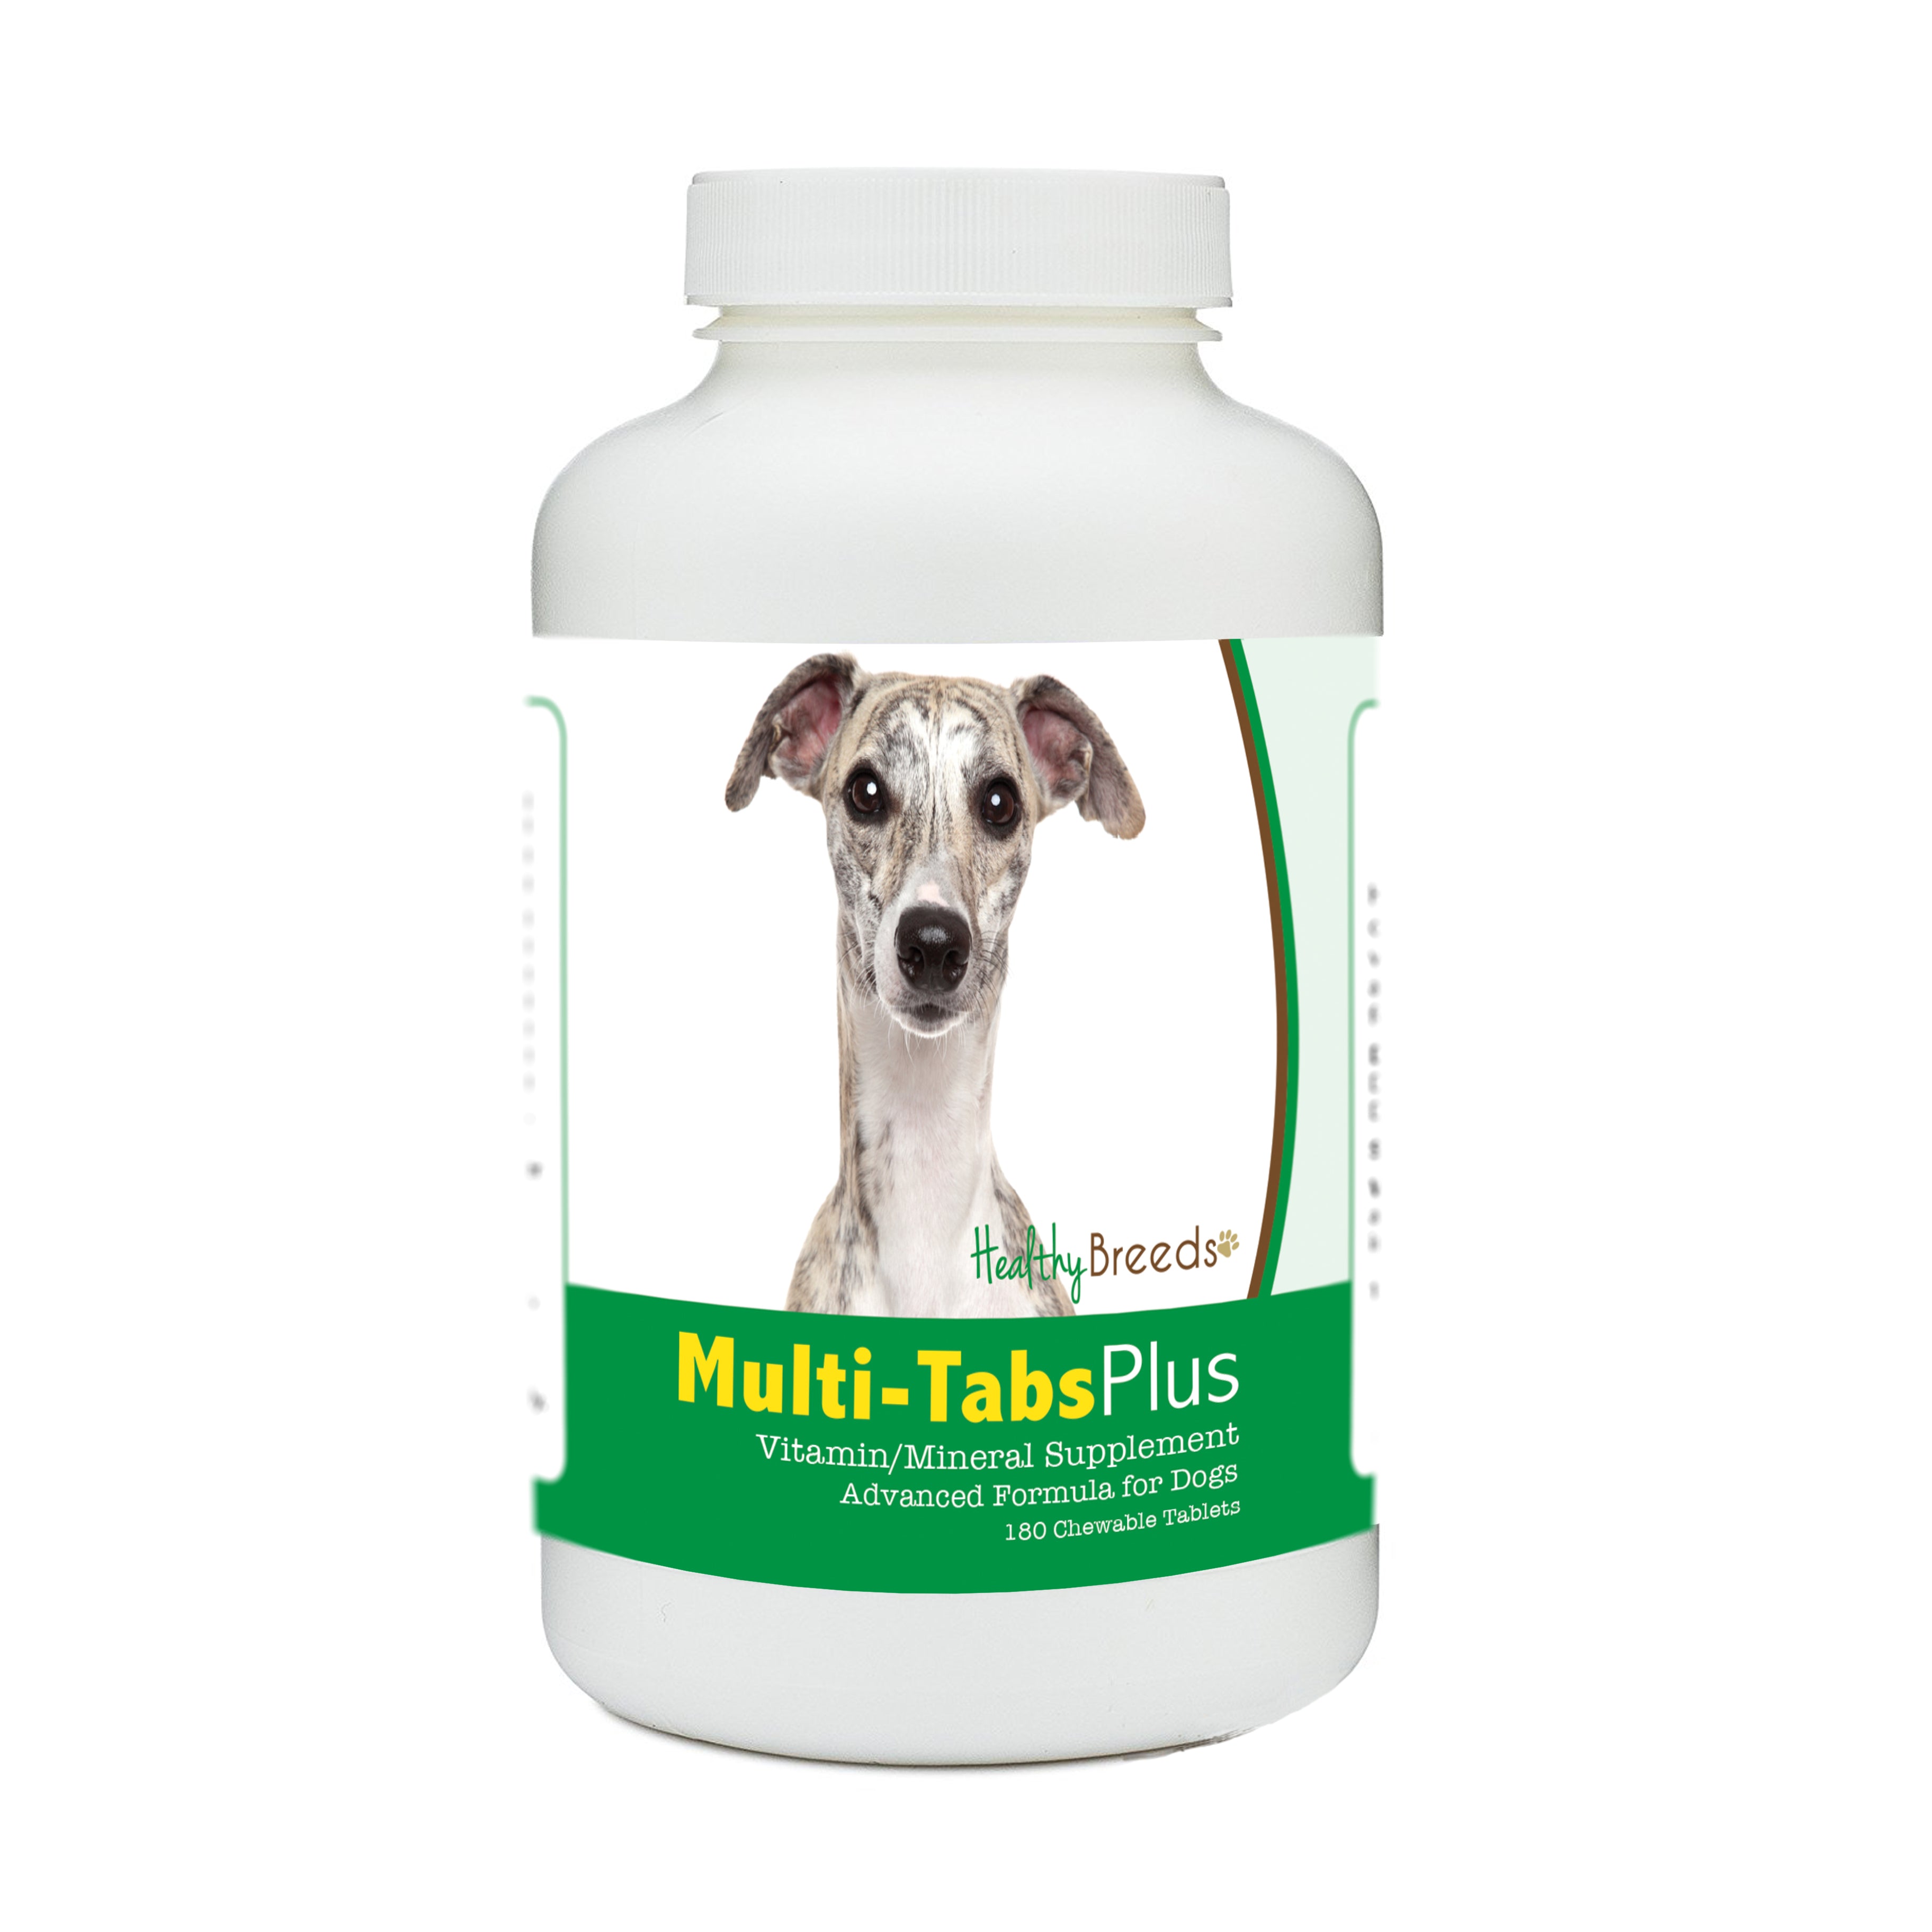 Whippet Multi-Tabs Plus Chewable Tablets 180 Count